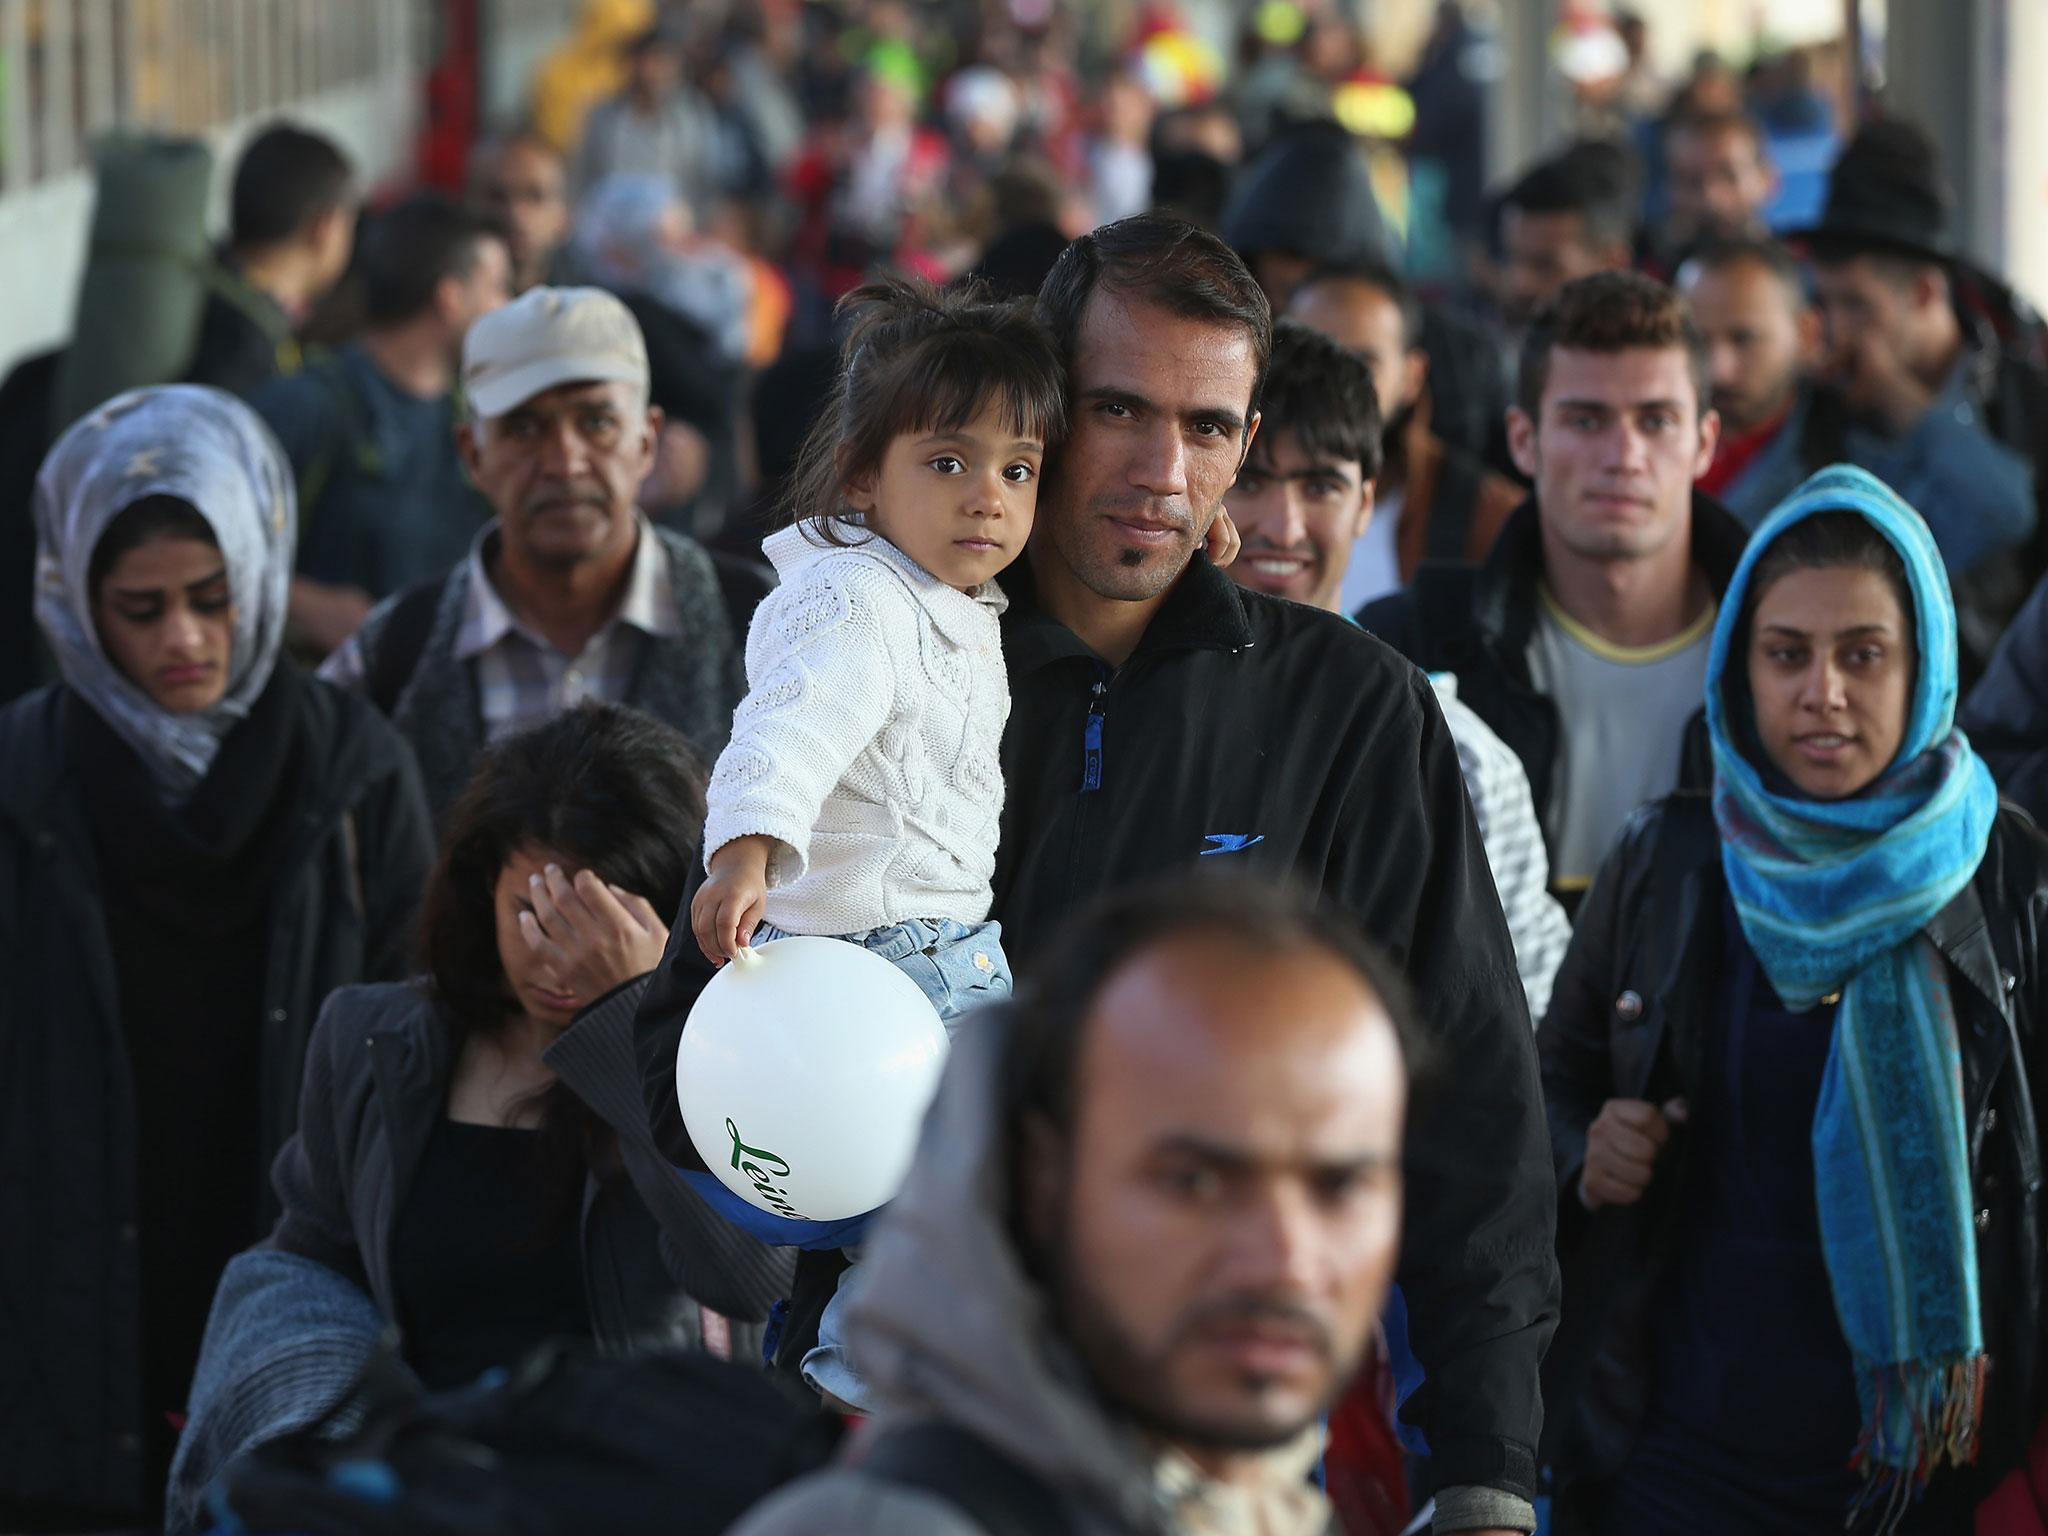 More than a million refugees have arrived in Germany since the start of the crisis